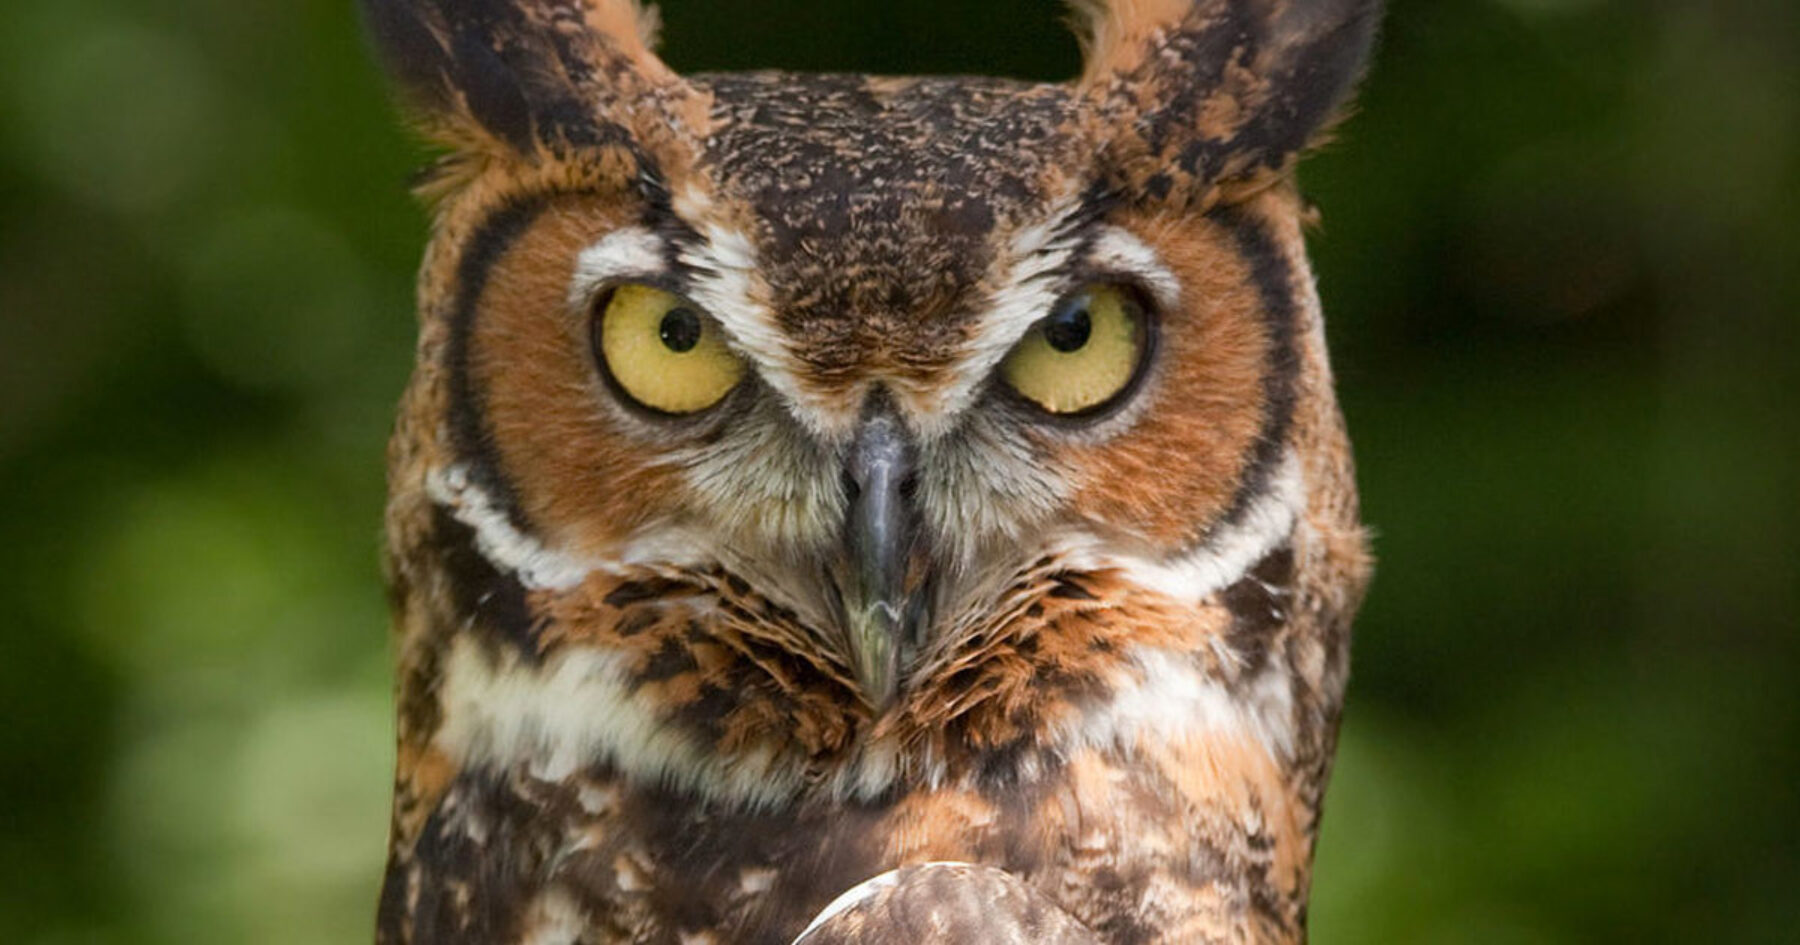 Former Park Ranger Says Great Horned Owl is Ripping Society Apart